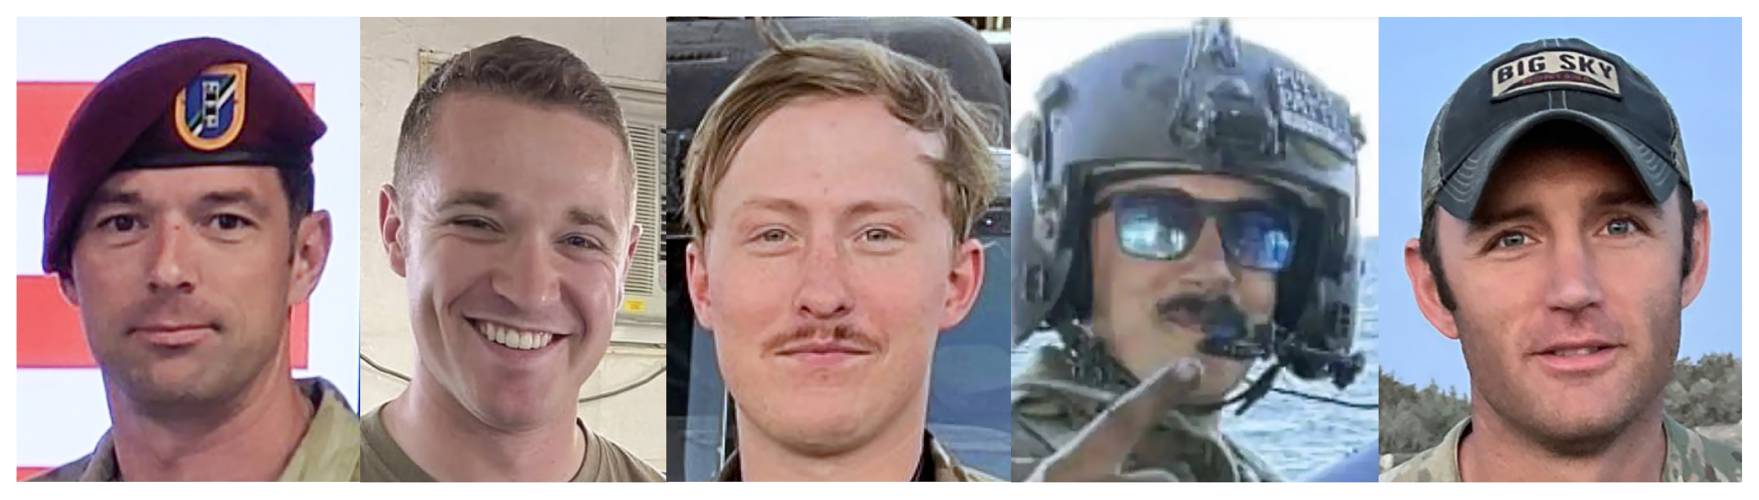 These undated photos provided by U.S. Army Special Operations Command Public Affairs, shows the five Army aviation special operations forces killed when their helicopter crashed in the Eastern Mediterranean over the weekend. From left are, Chief Warrant Officer 3 Stephen R. Dwyer, of Clarksville, Tenn., Sgt. Andrew P. Southard, of Apache Junction, Ariz., Staff Sgt. Tanner W. Grone, of Gorham, N.H., Sgt. Cade M. Wolfe, of Mankato, Minn., and Chief Warrant Officer 2 Shane M. Barnes,...